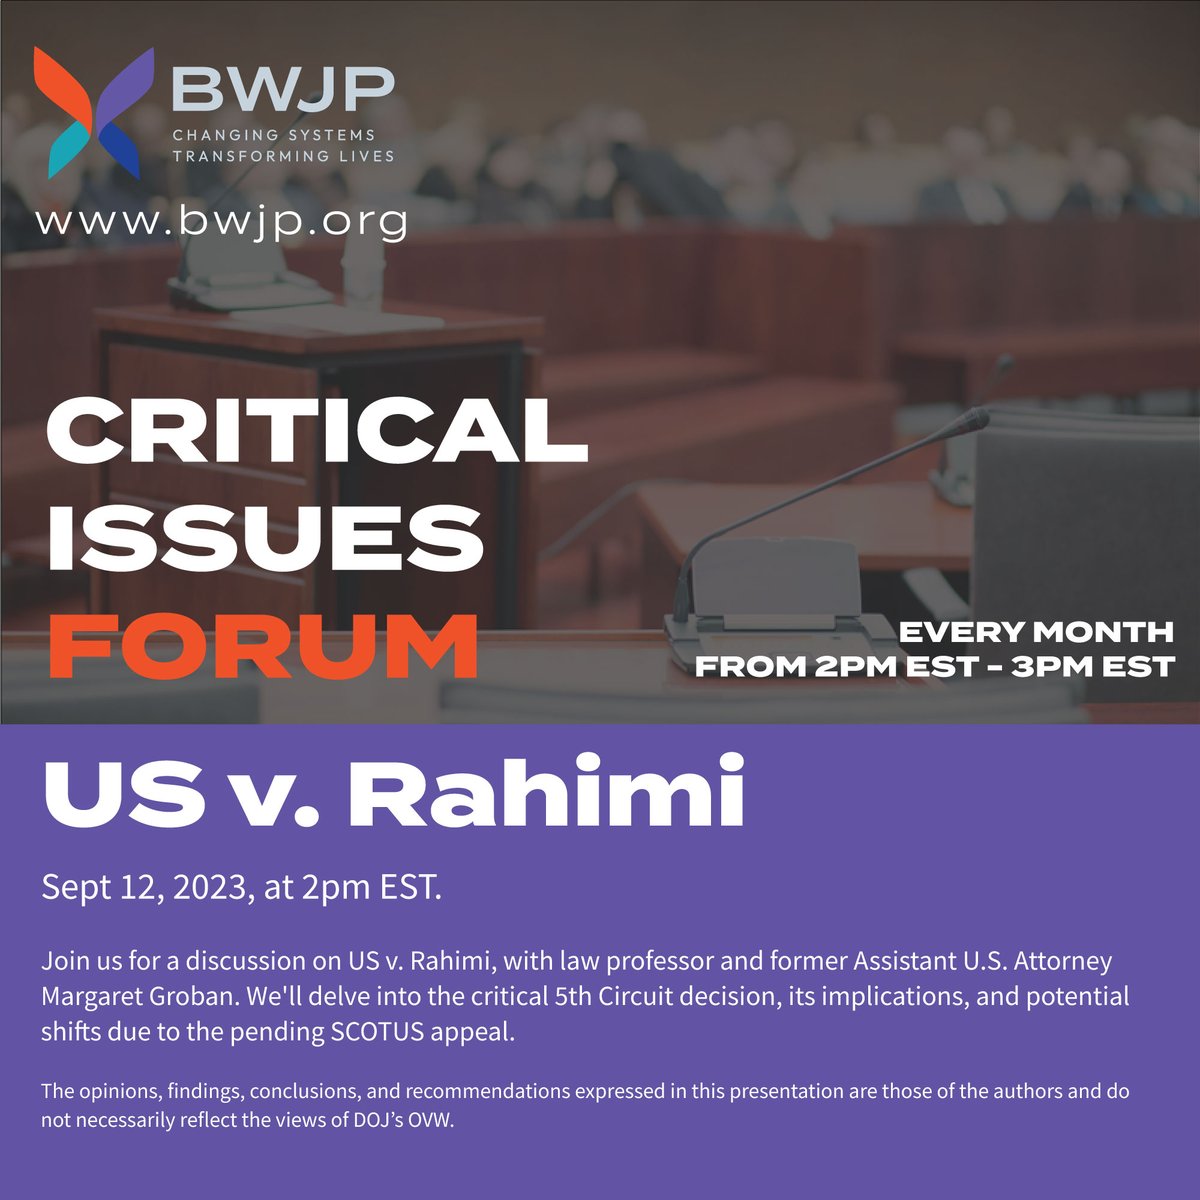 Don't forget to register for the discussion on US v. Rahimi! Join us on September 12th at 2 pm EST. We will dive into the 5th circuit decision with a law professor and former Assistant U.S. Attorney Margaret Groban. Register here: ngbvlc.org/Courses/Course…